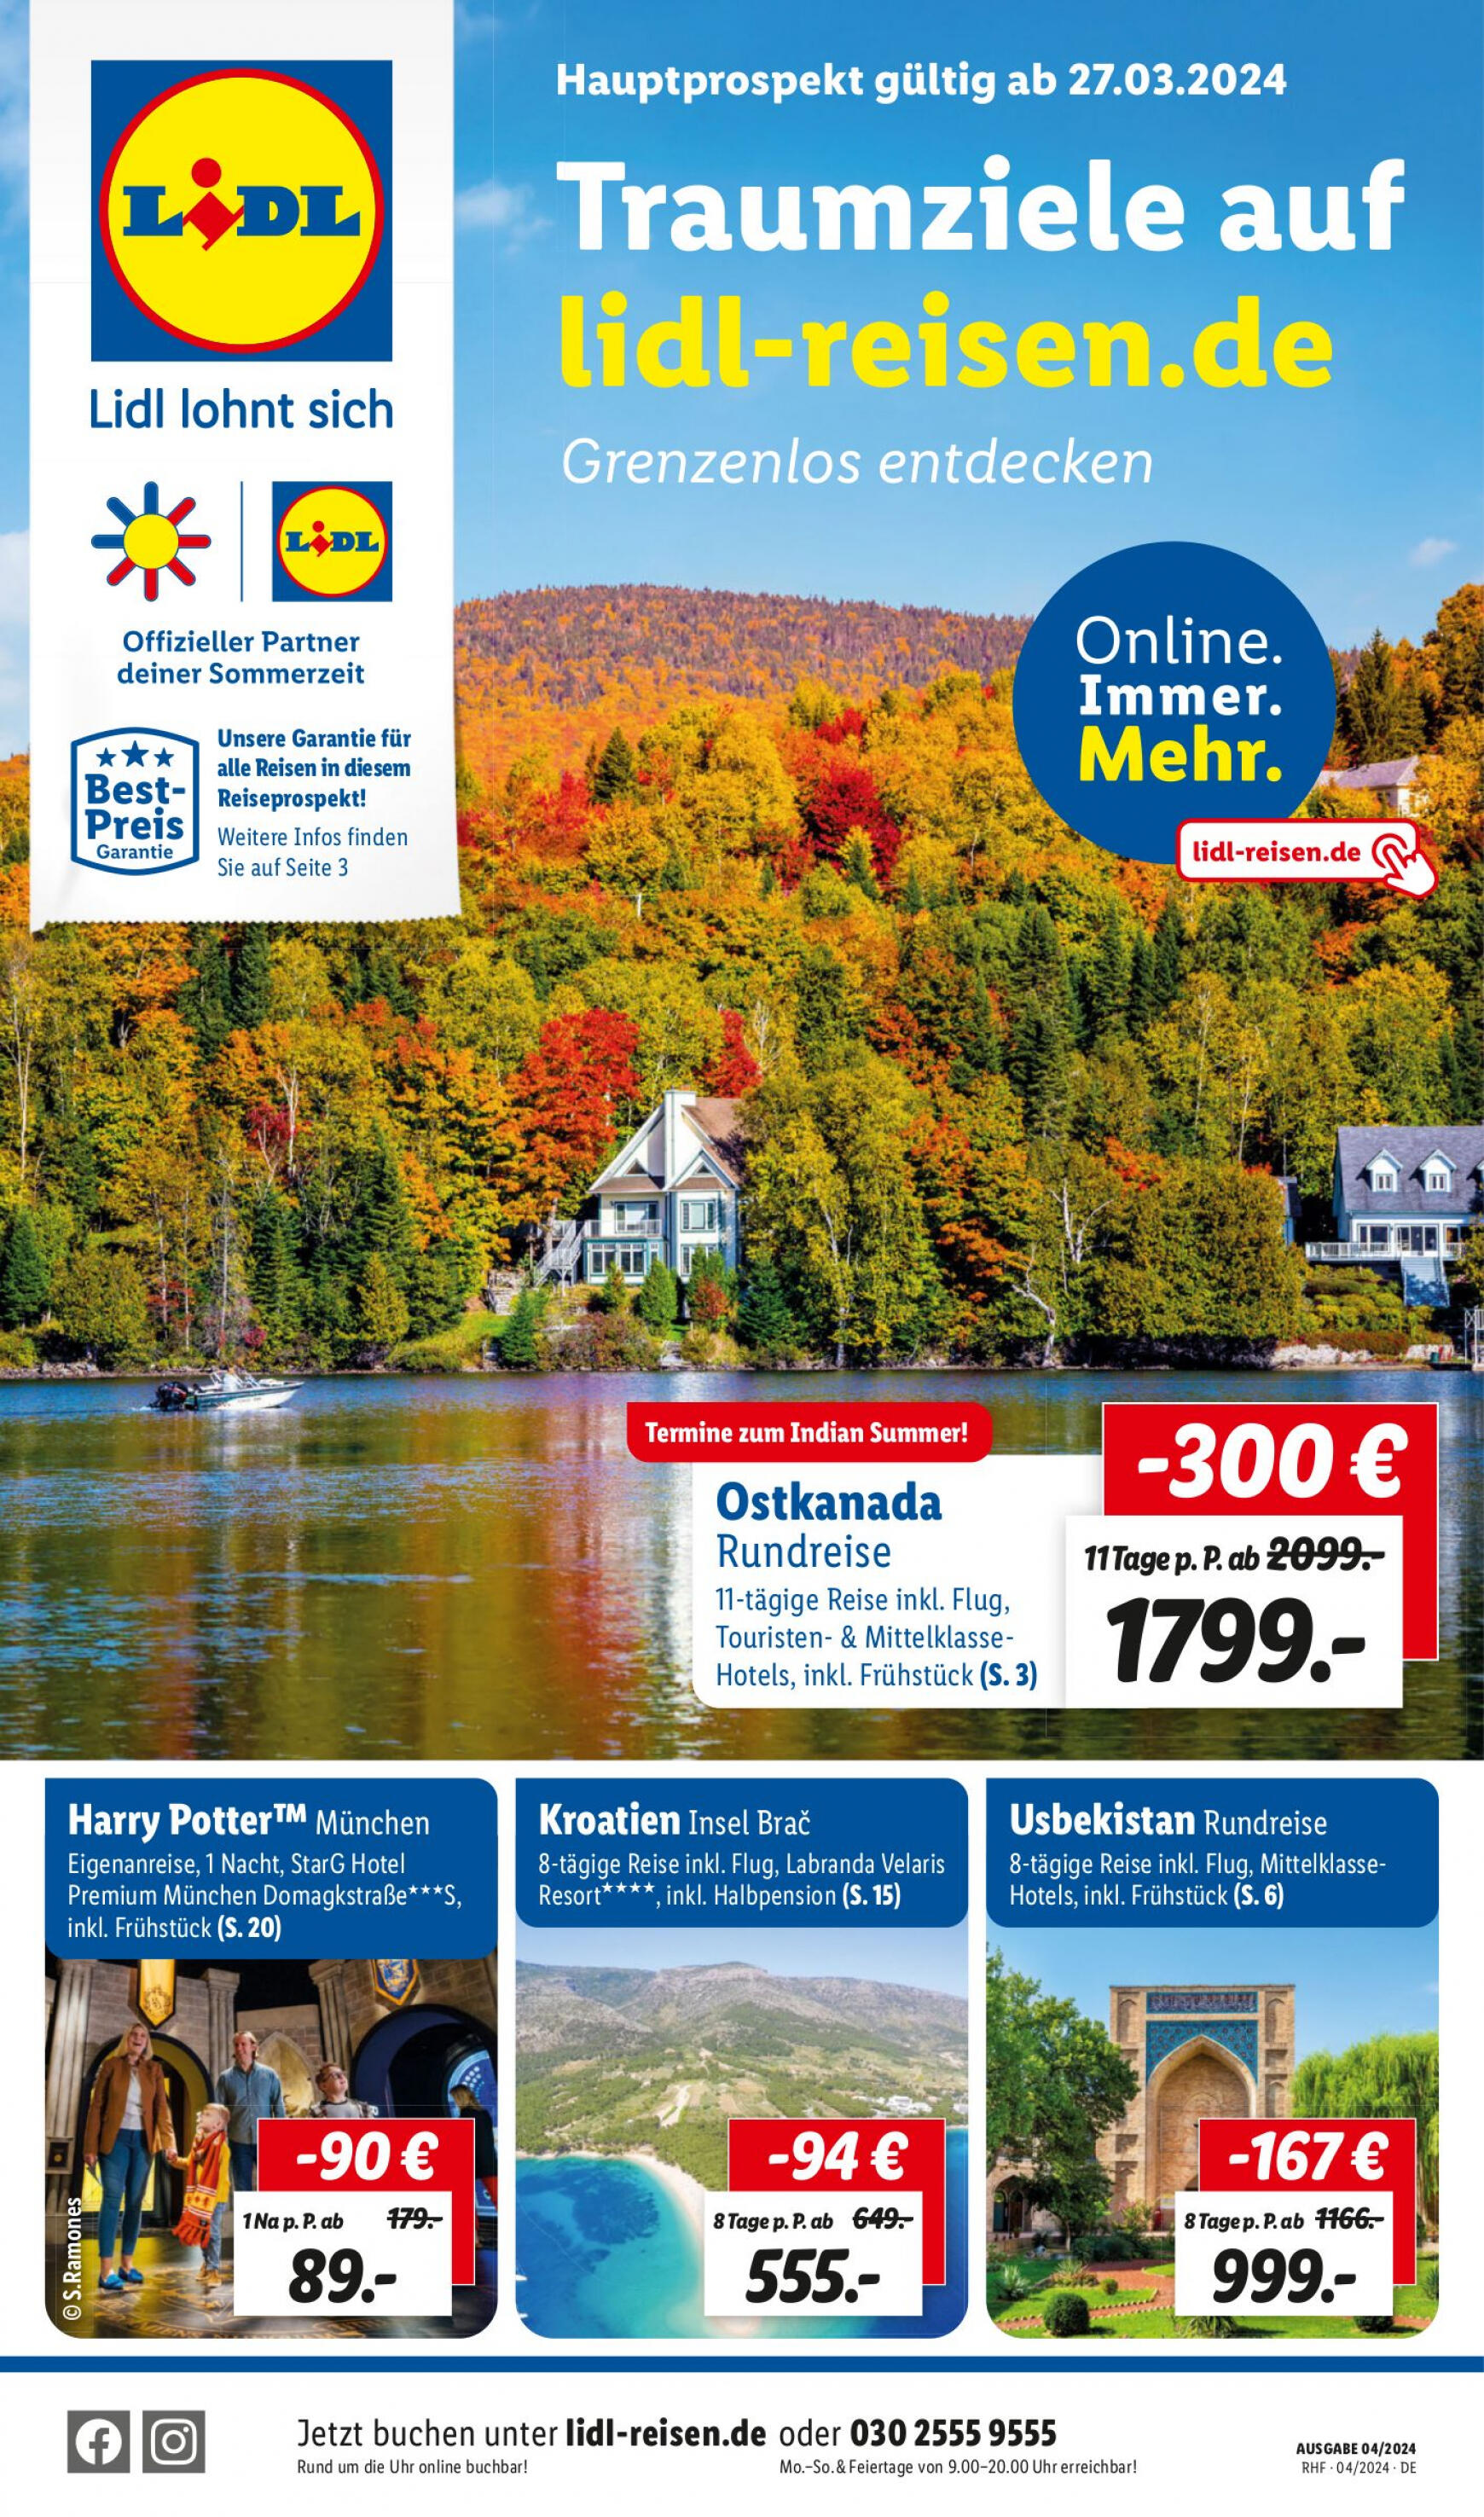 lidl - Flyer Lidl - April Reise-Highlights aktuell 27.03. - 30.04. - page: 1